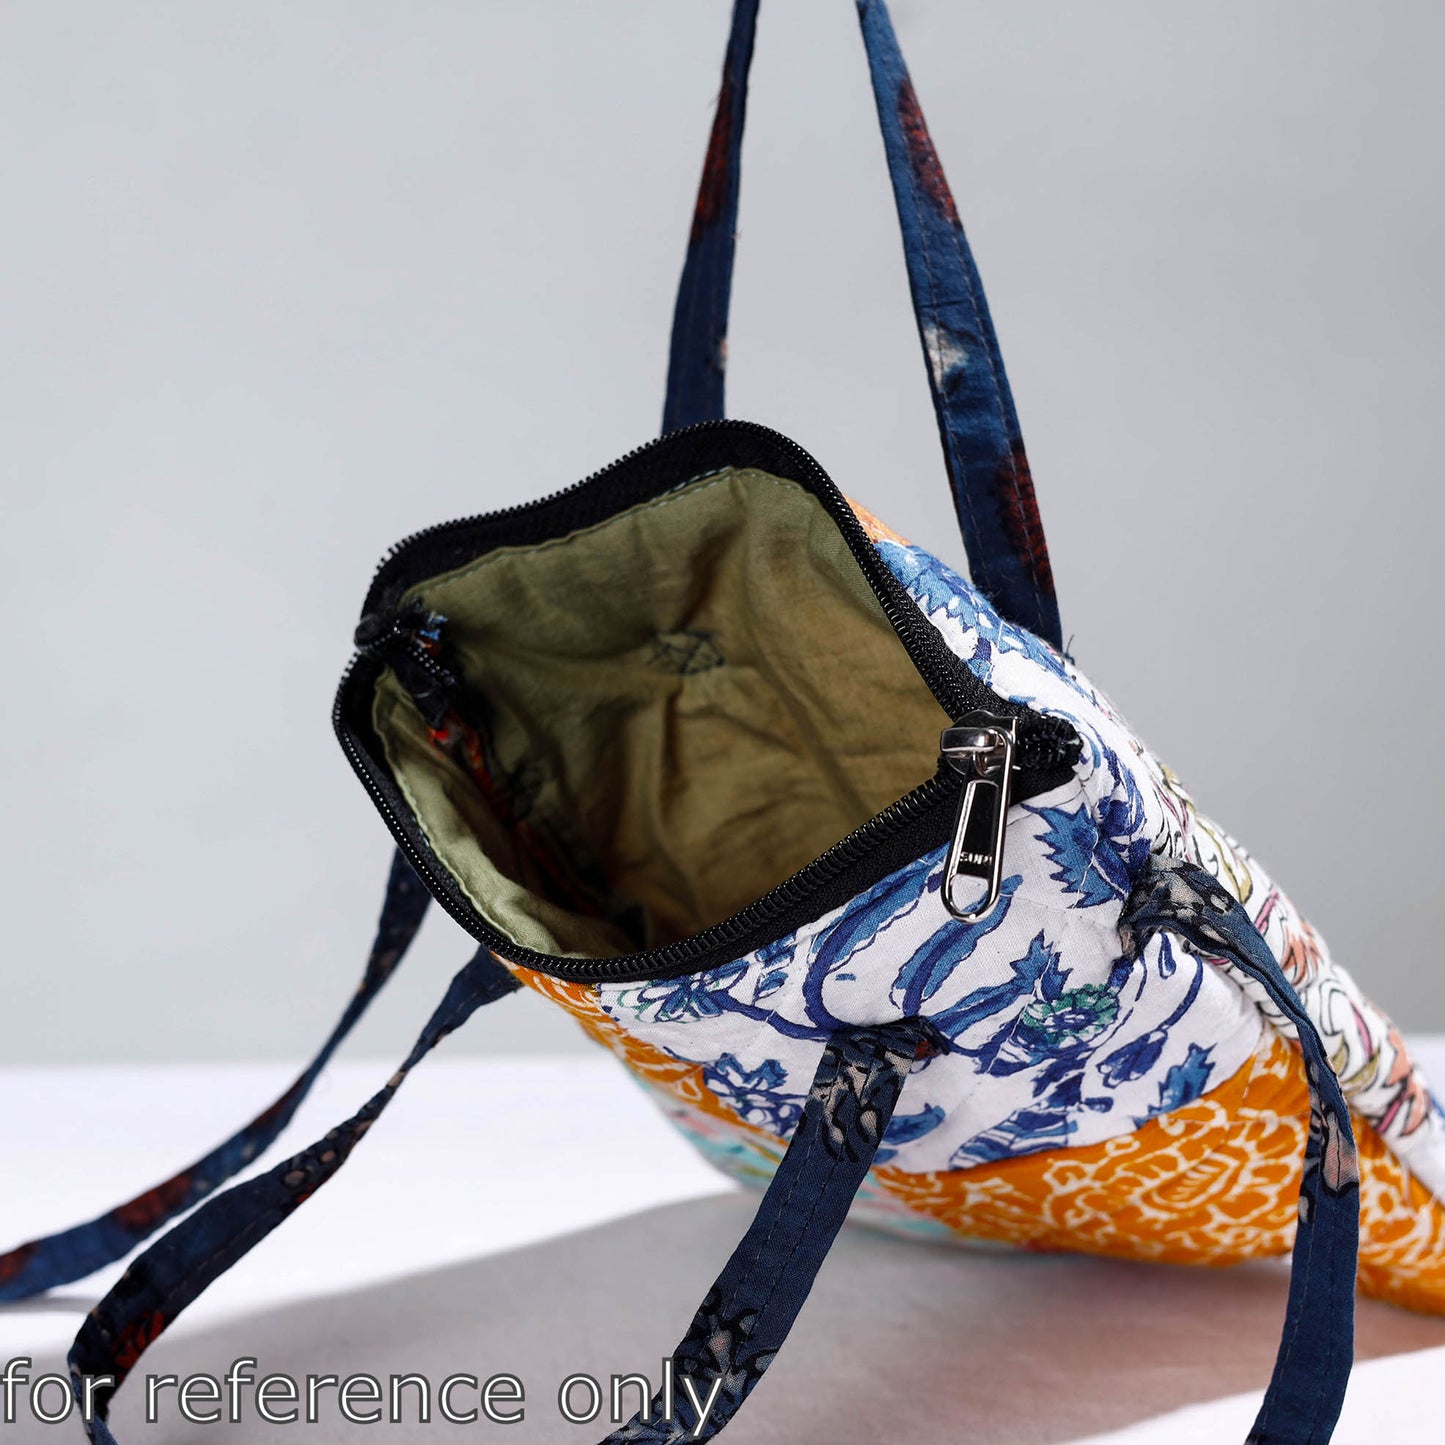 Multicolor - Handmade Quilted Cotton Patchwork Sling Bag 24